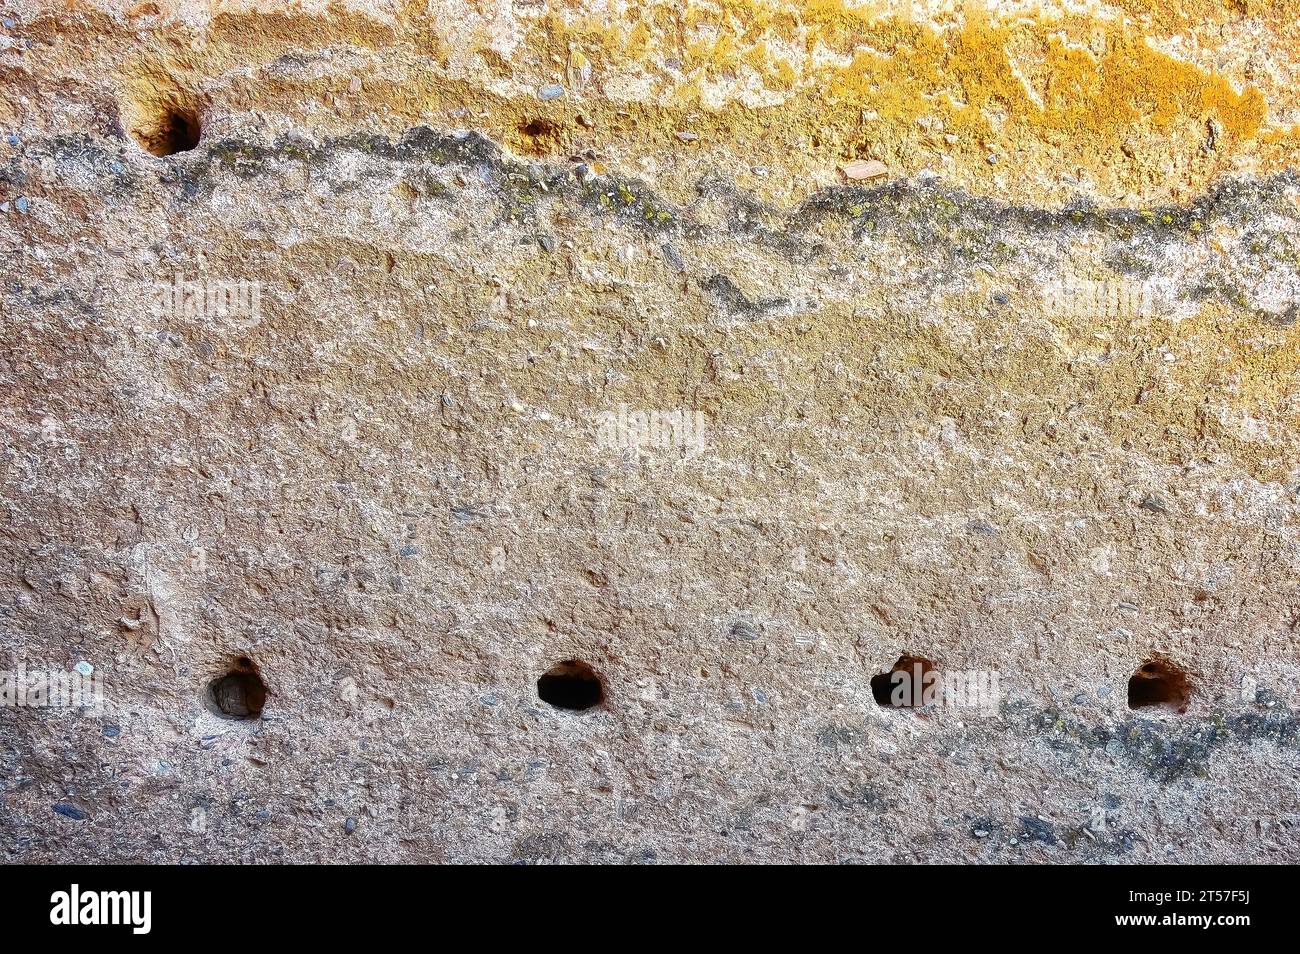 Granada, Spain, holes in an ancient wall. Architectural detail or feature of Alhambra fortress. Stock Photo